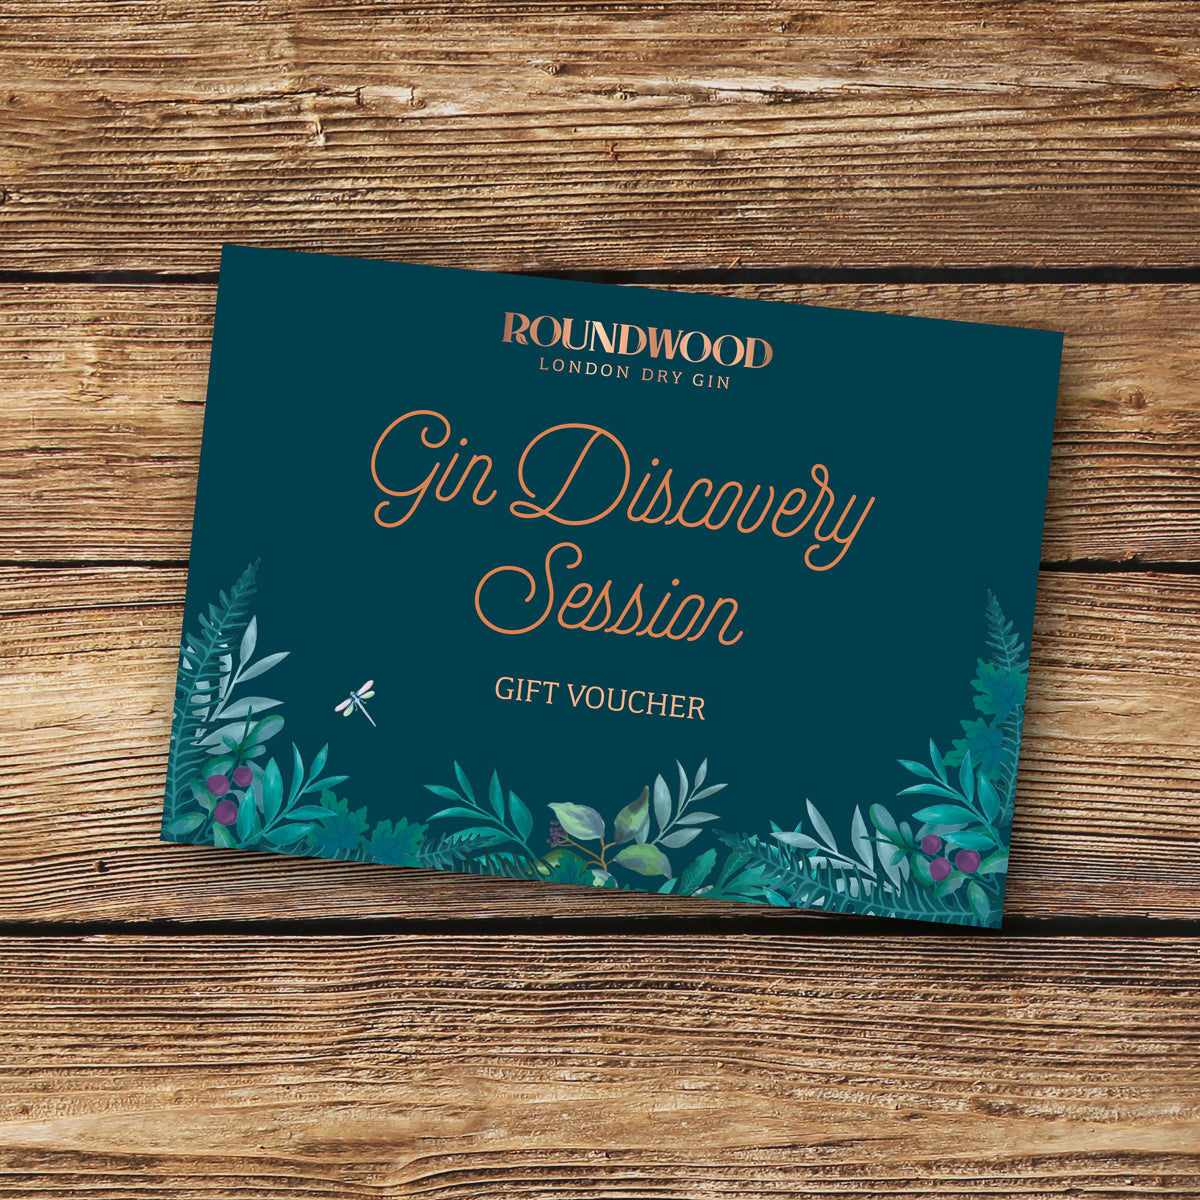 Gin Discovery Session Gift Voucher